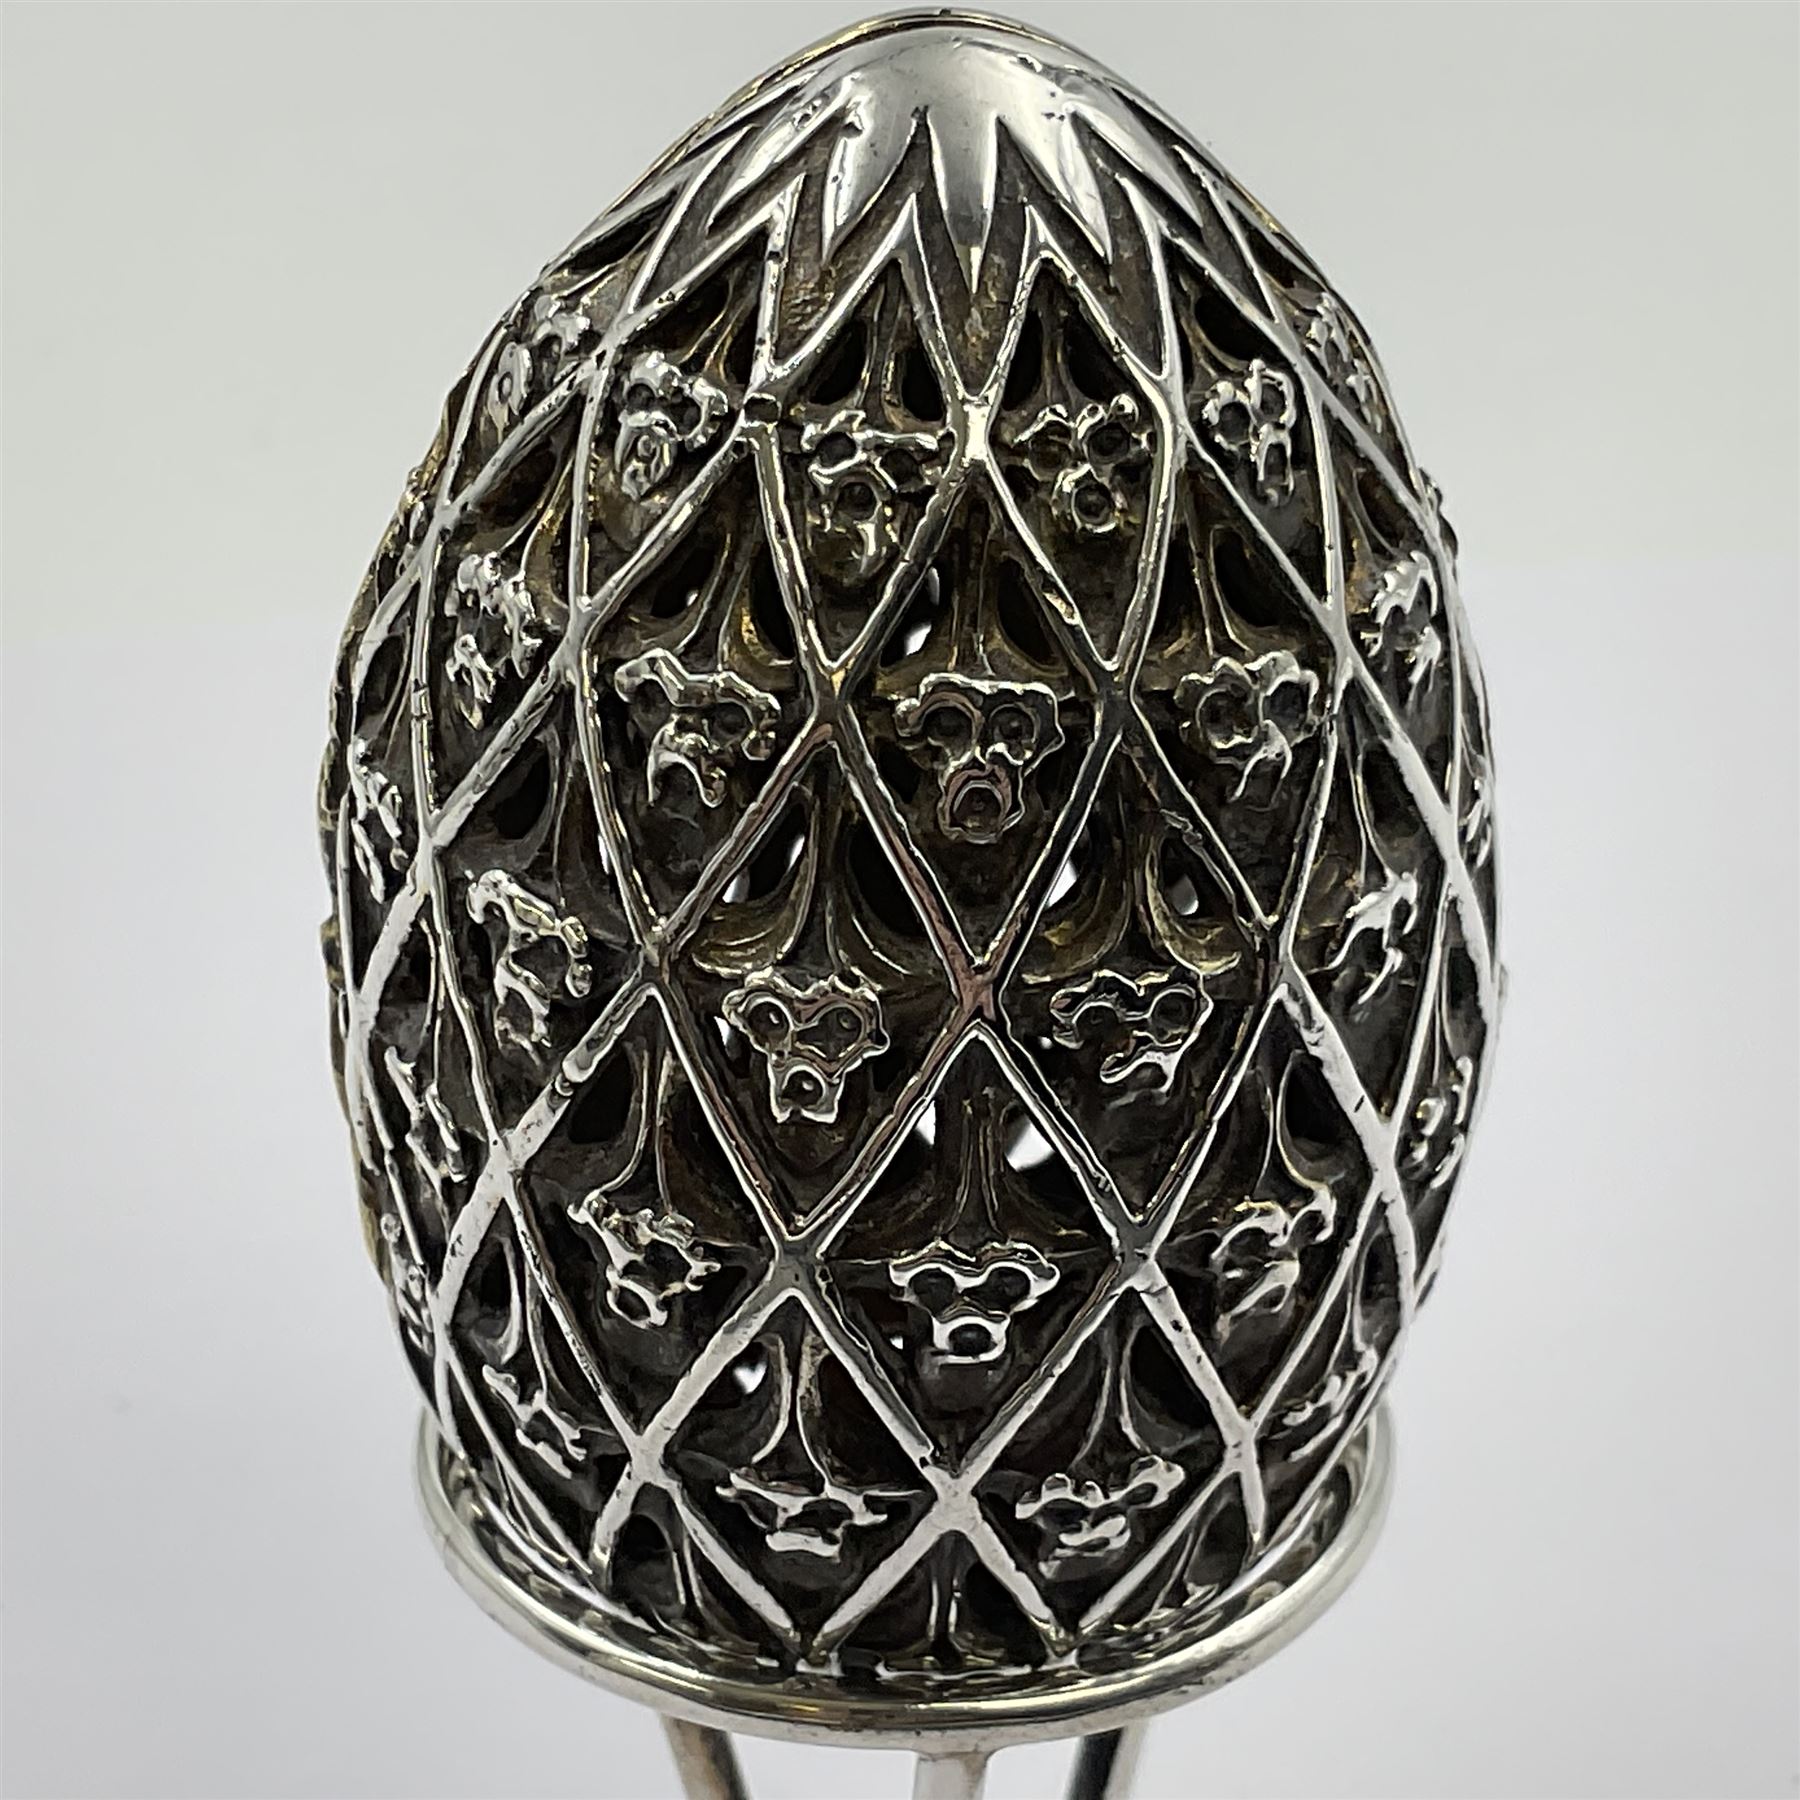 Modern silver limited edition Easter egg - Image 5 of 19